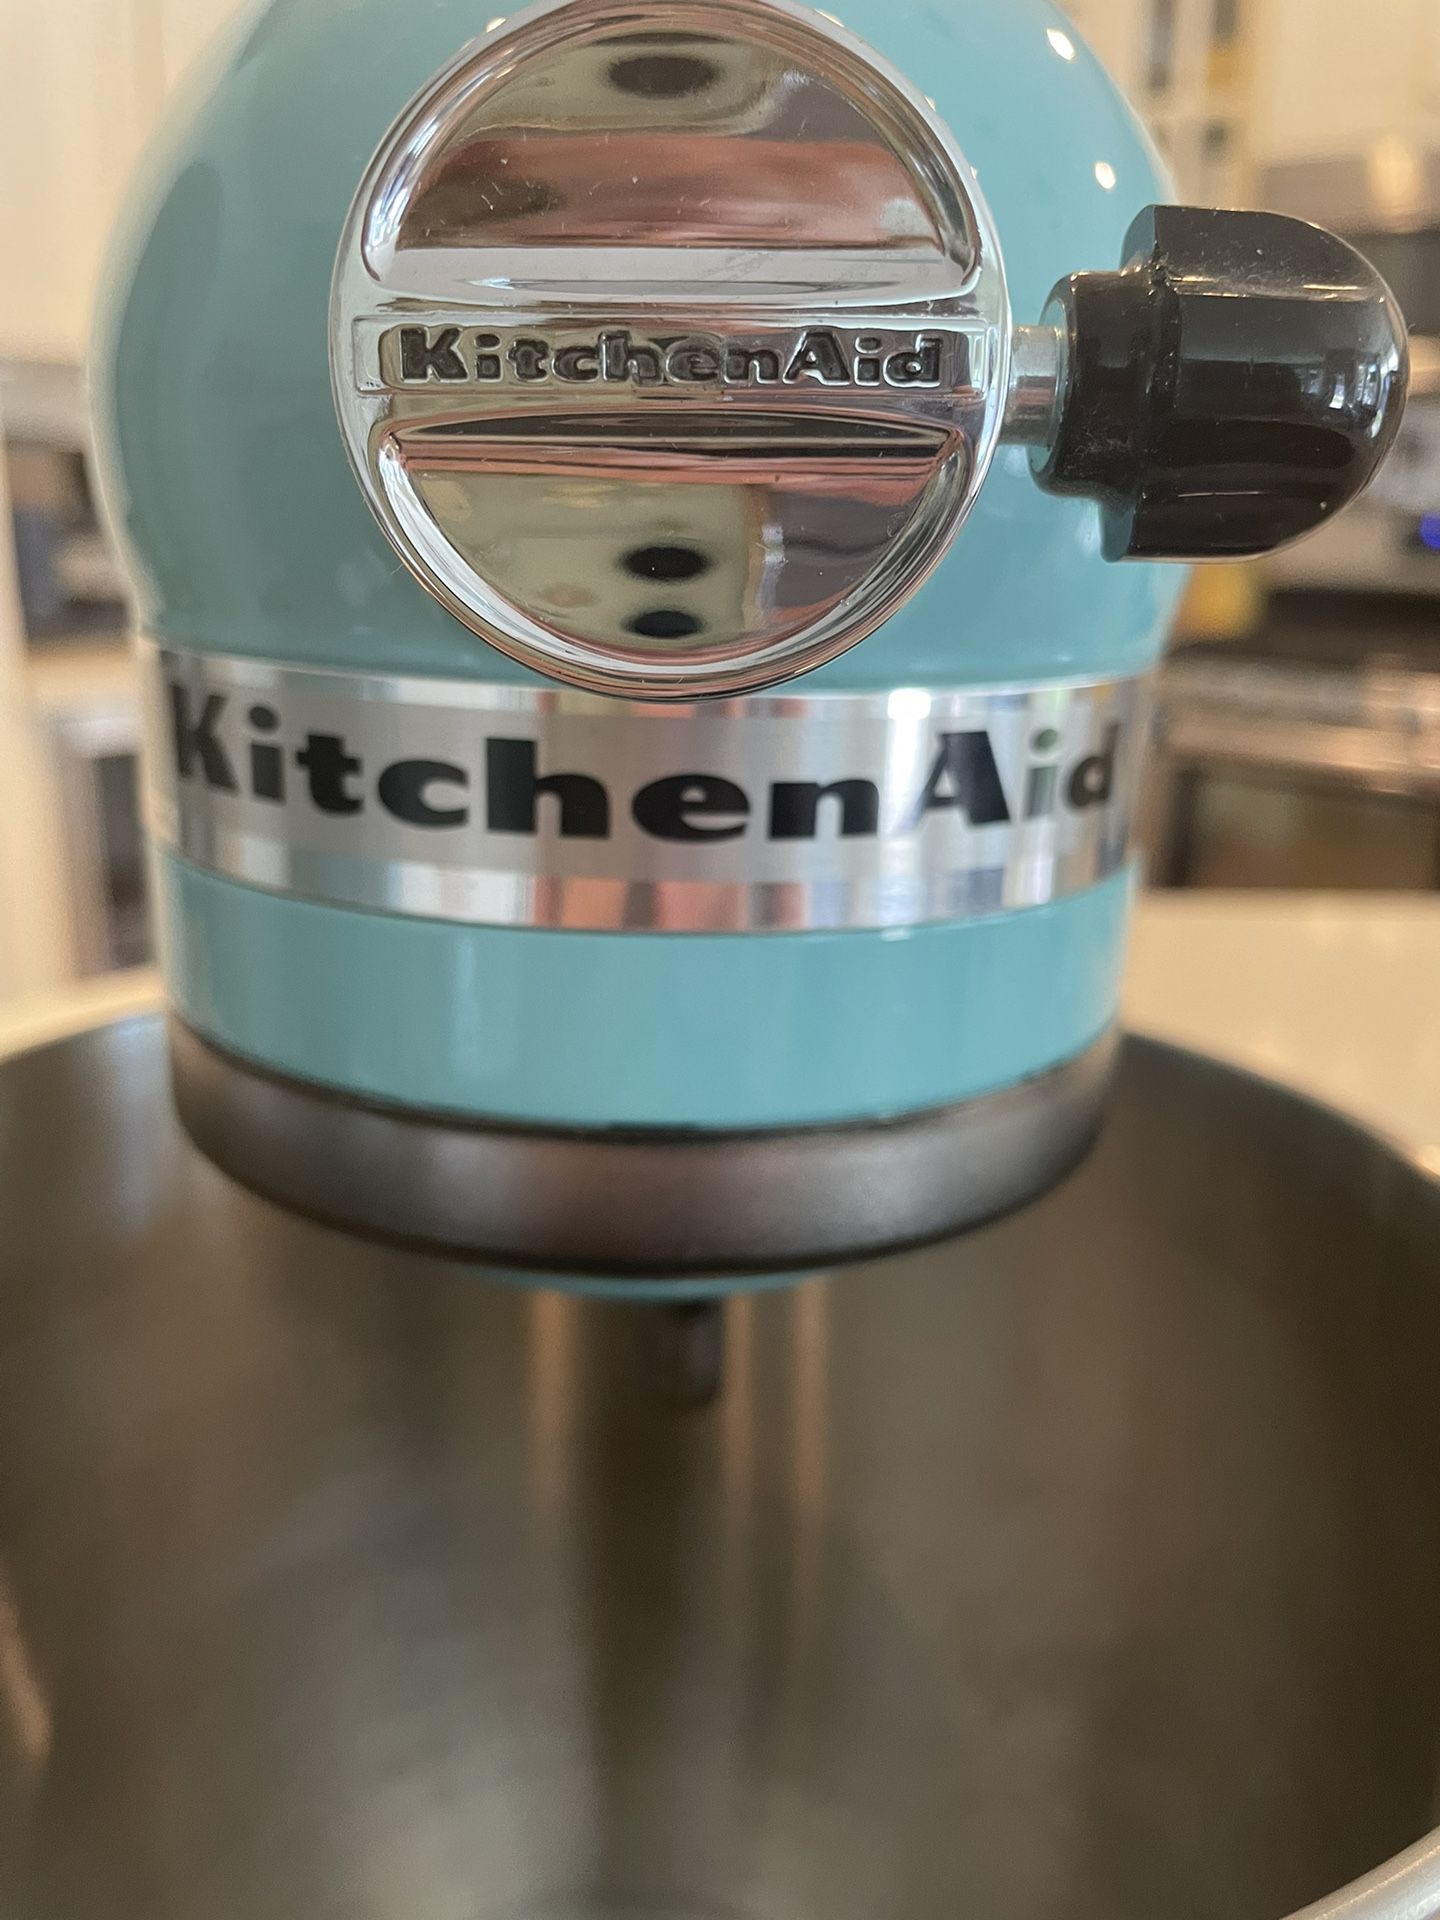 KitchenAid Aqua Sky Mixer With Attachments KSM150 for Sale in Gilbert, AZ -  OfferUp